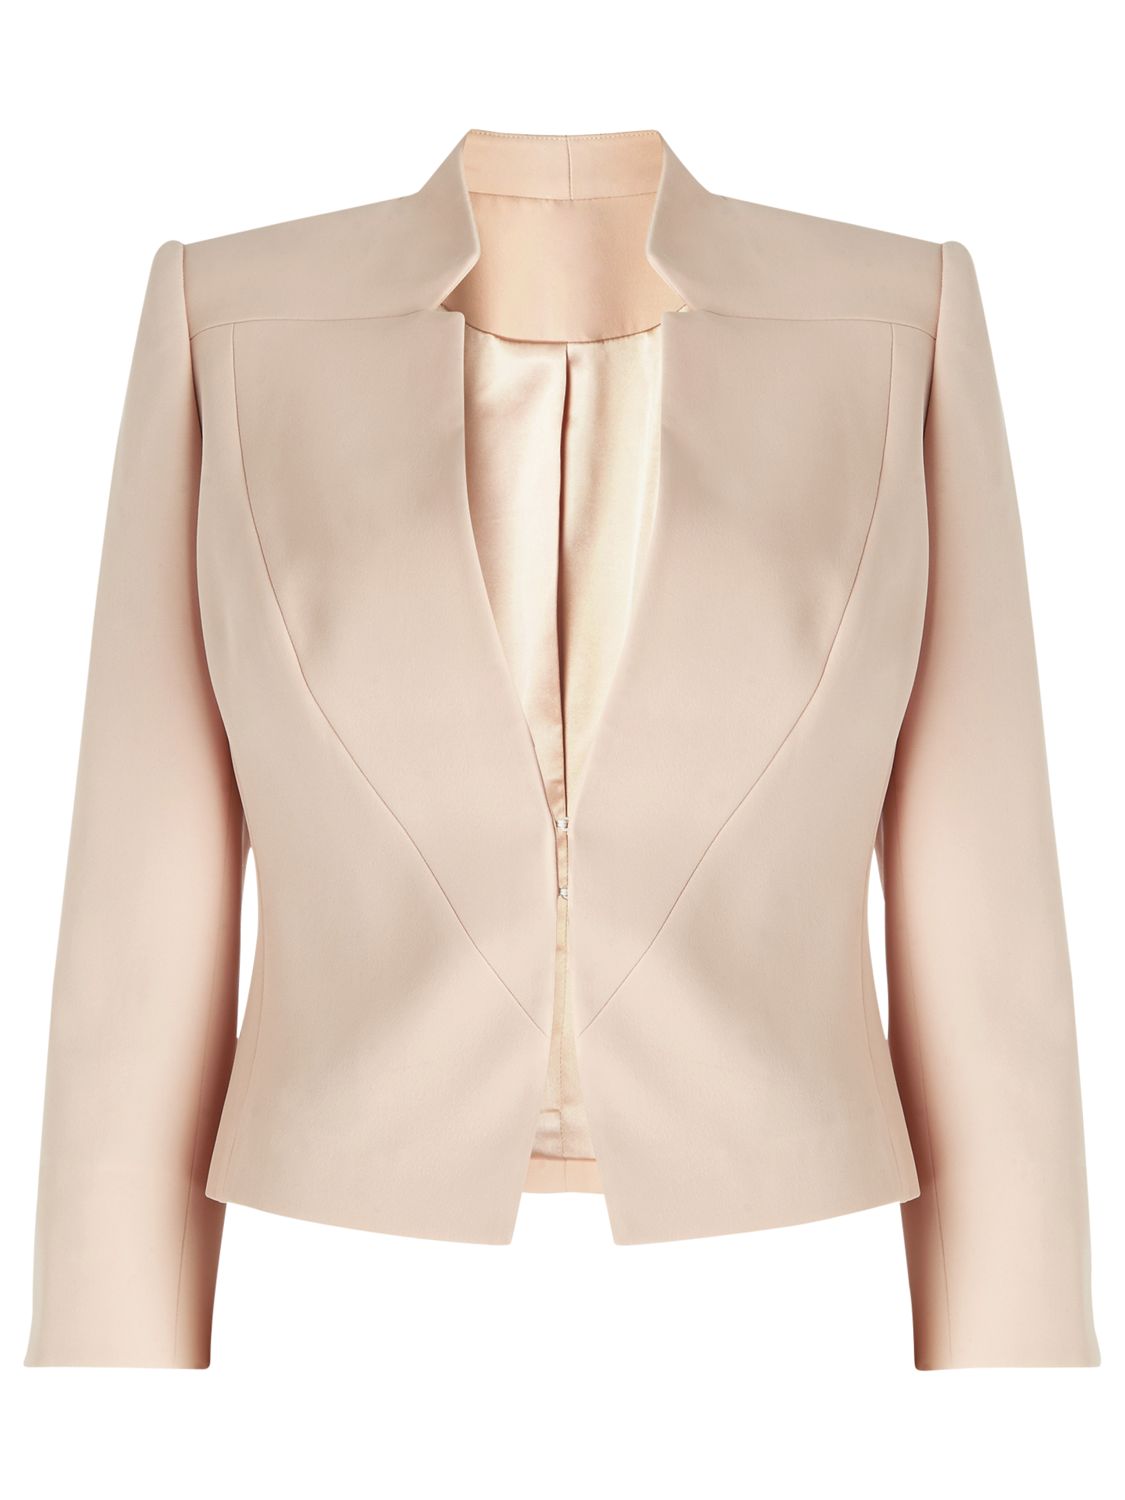 Phase Eight Limited Edition Jacket Five, Nude